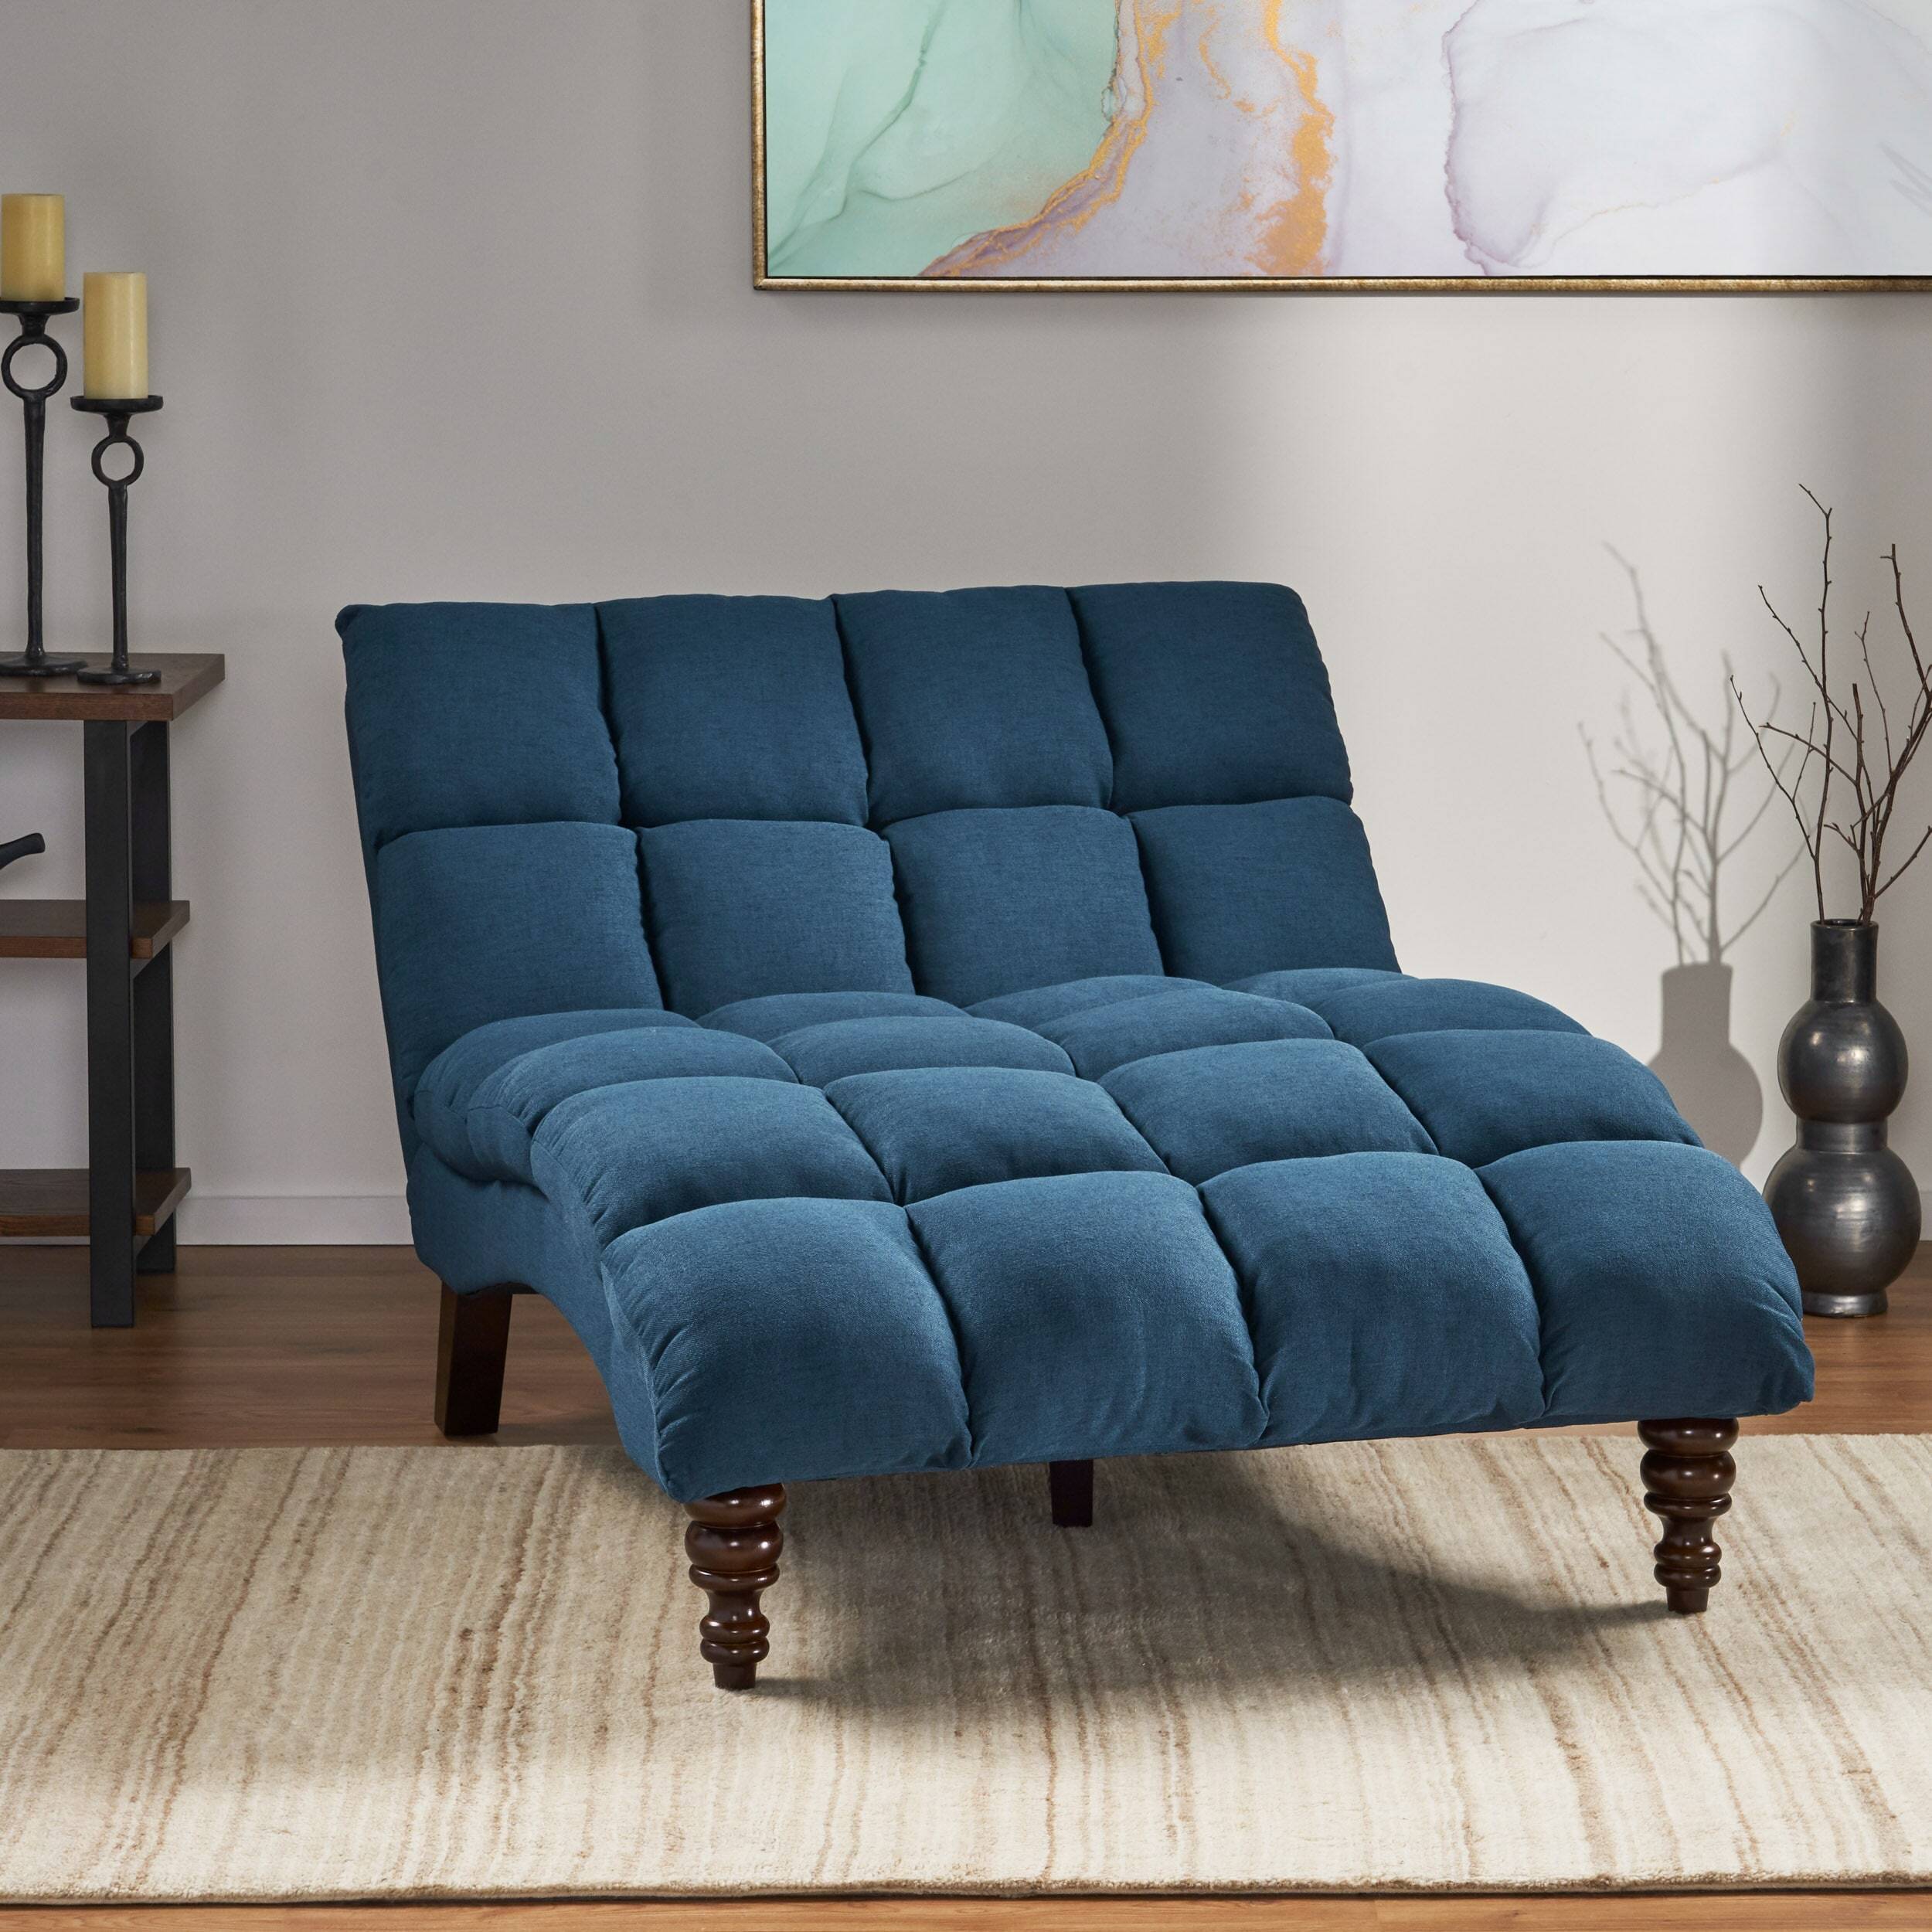 Double Armless Chaise Lounge Indoor